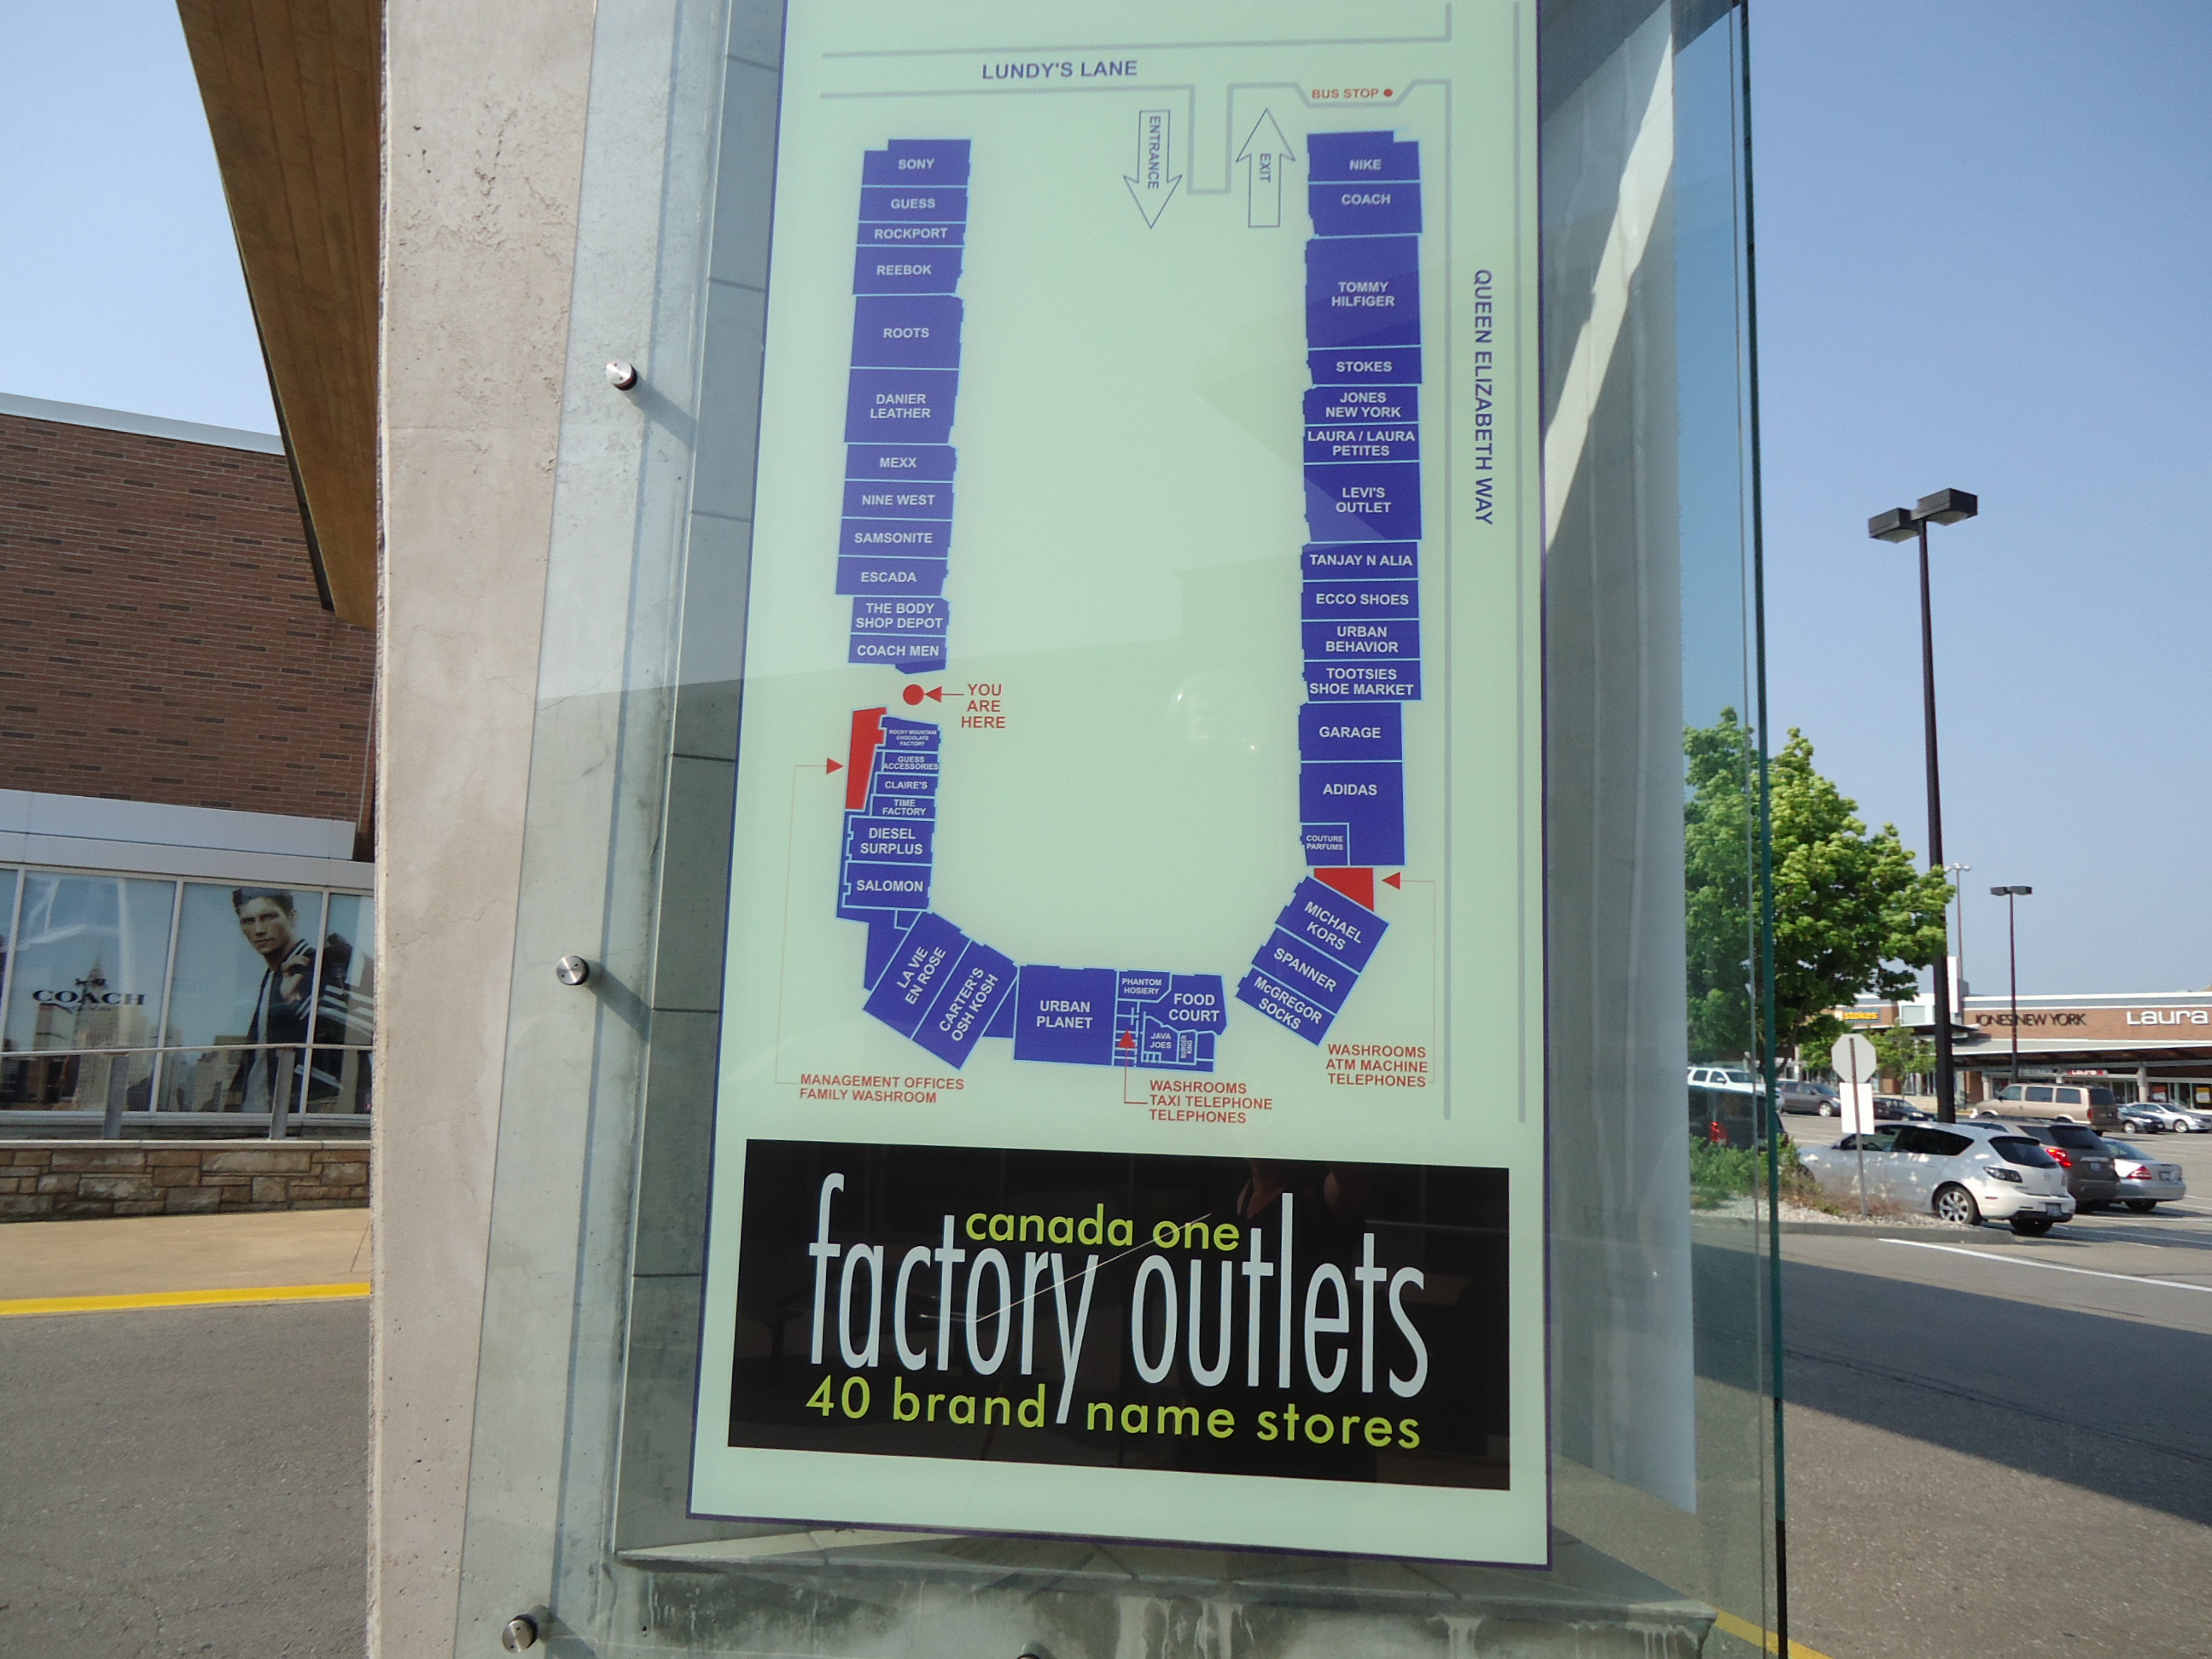 canada one factory outlets 40 brand name stores lundy’s lane niagara falls linda randall | Idea ...